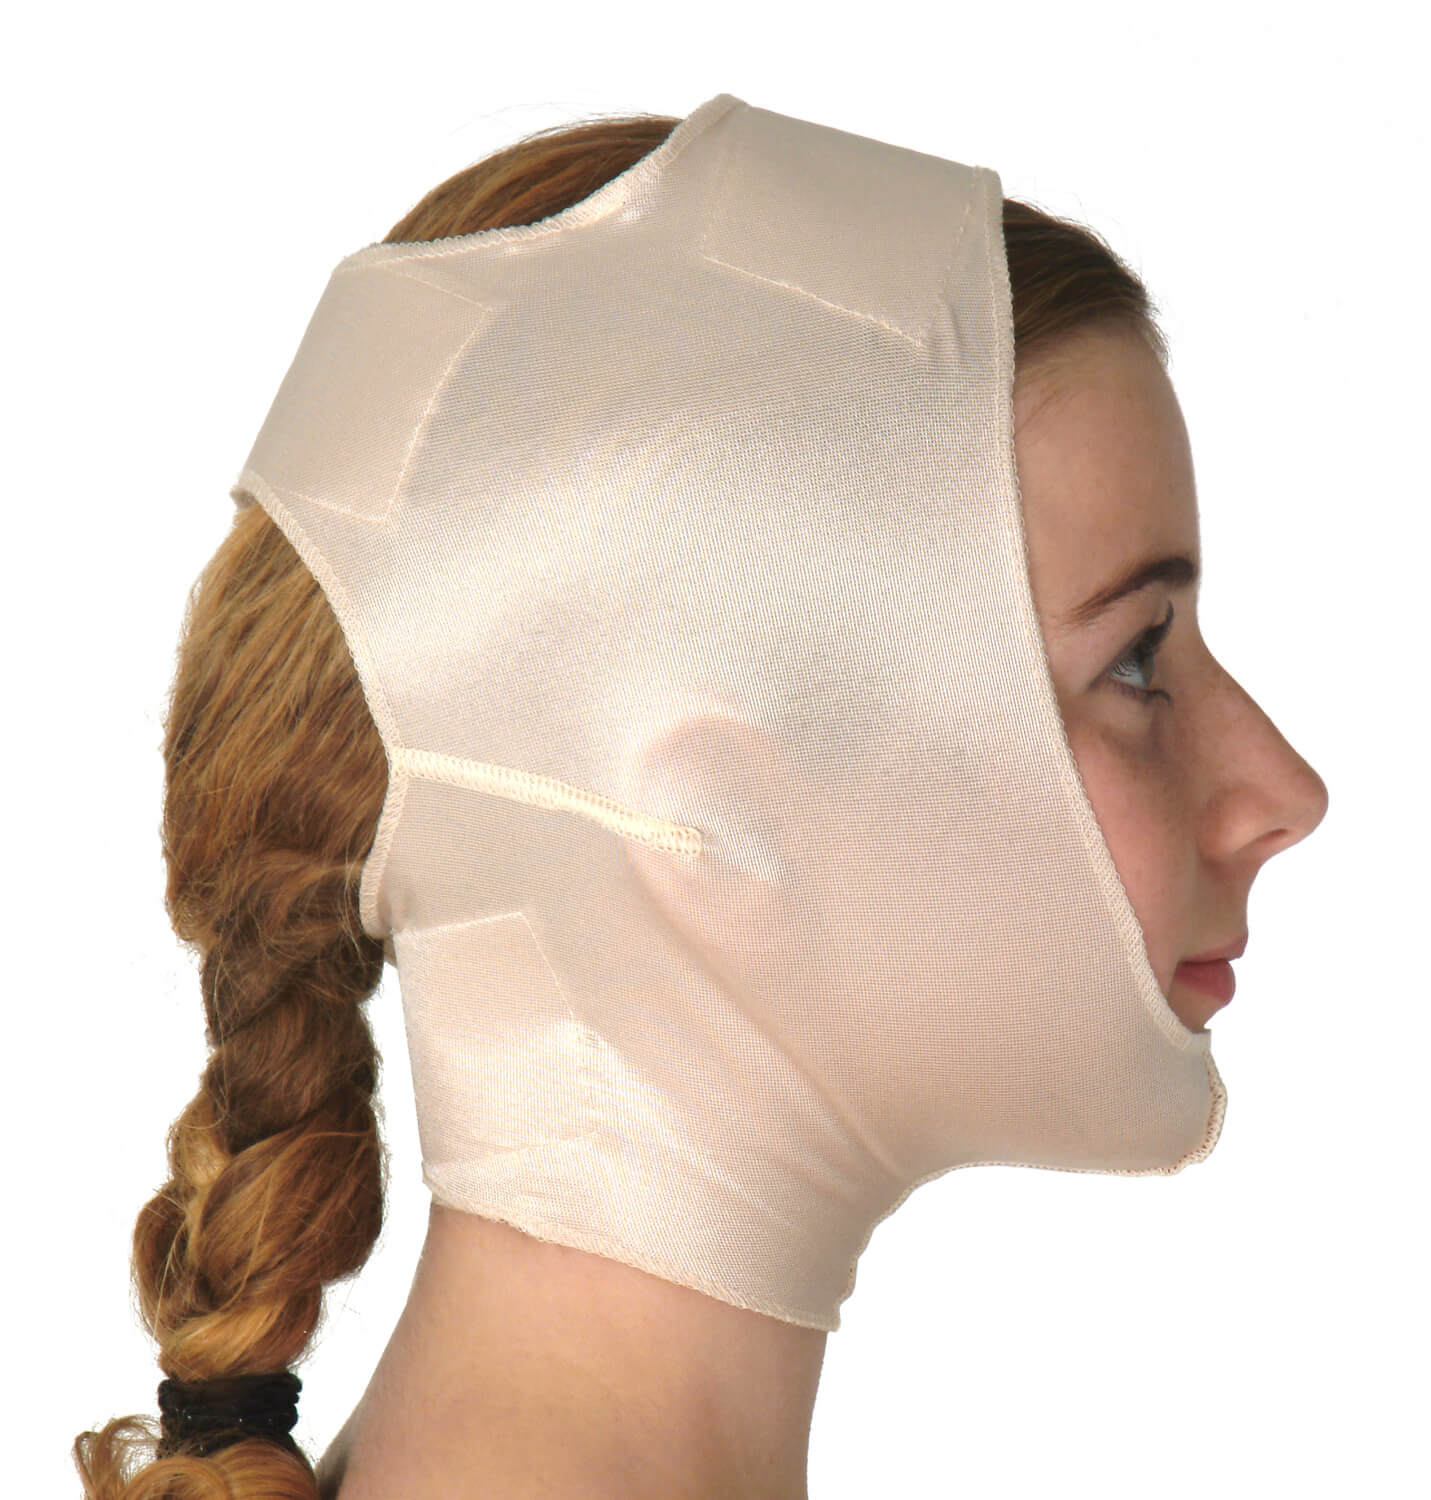 Chin & head support, closed ear